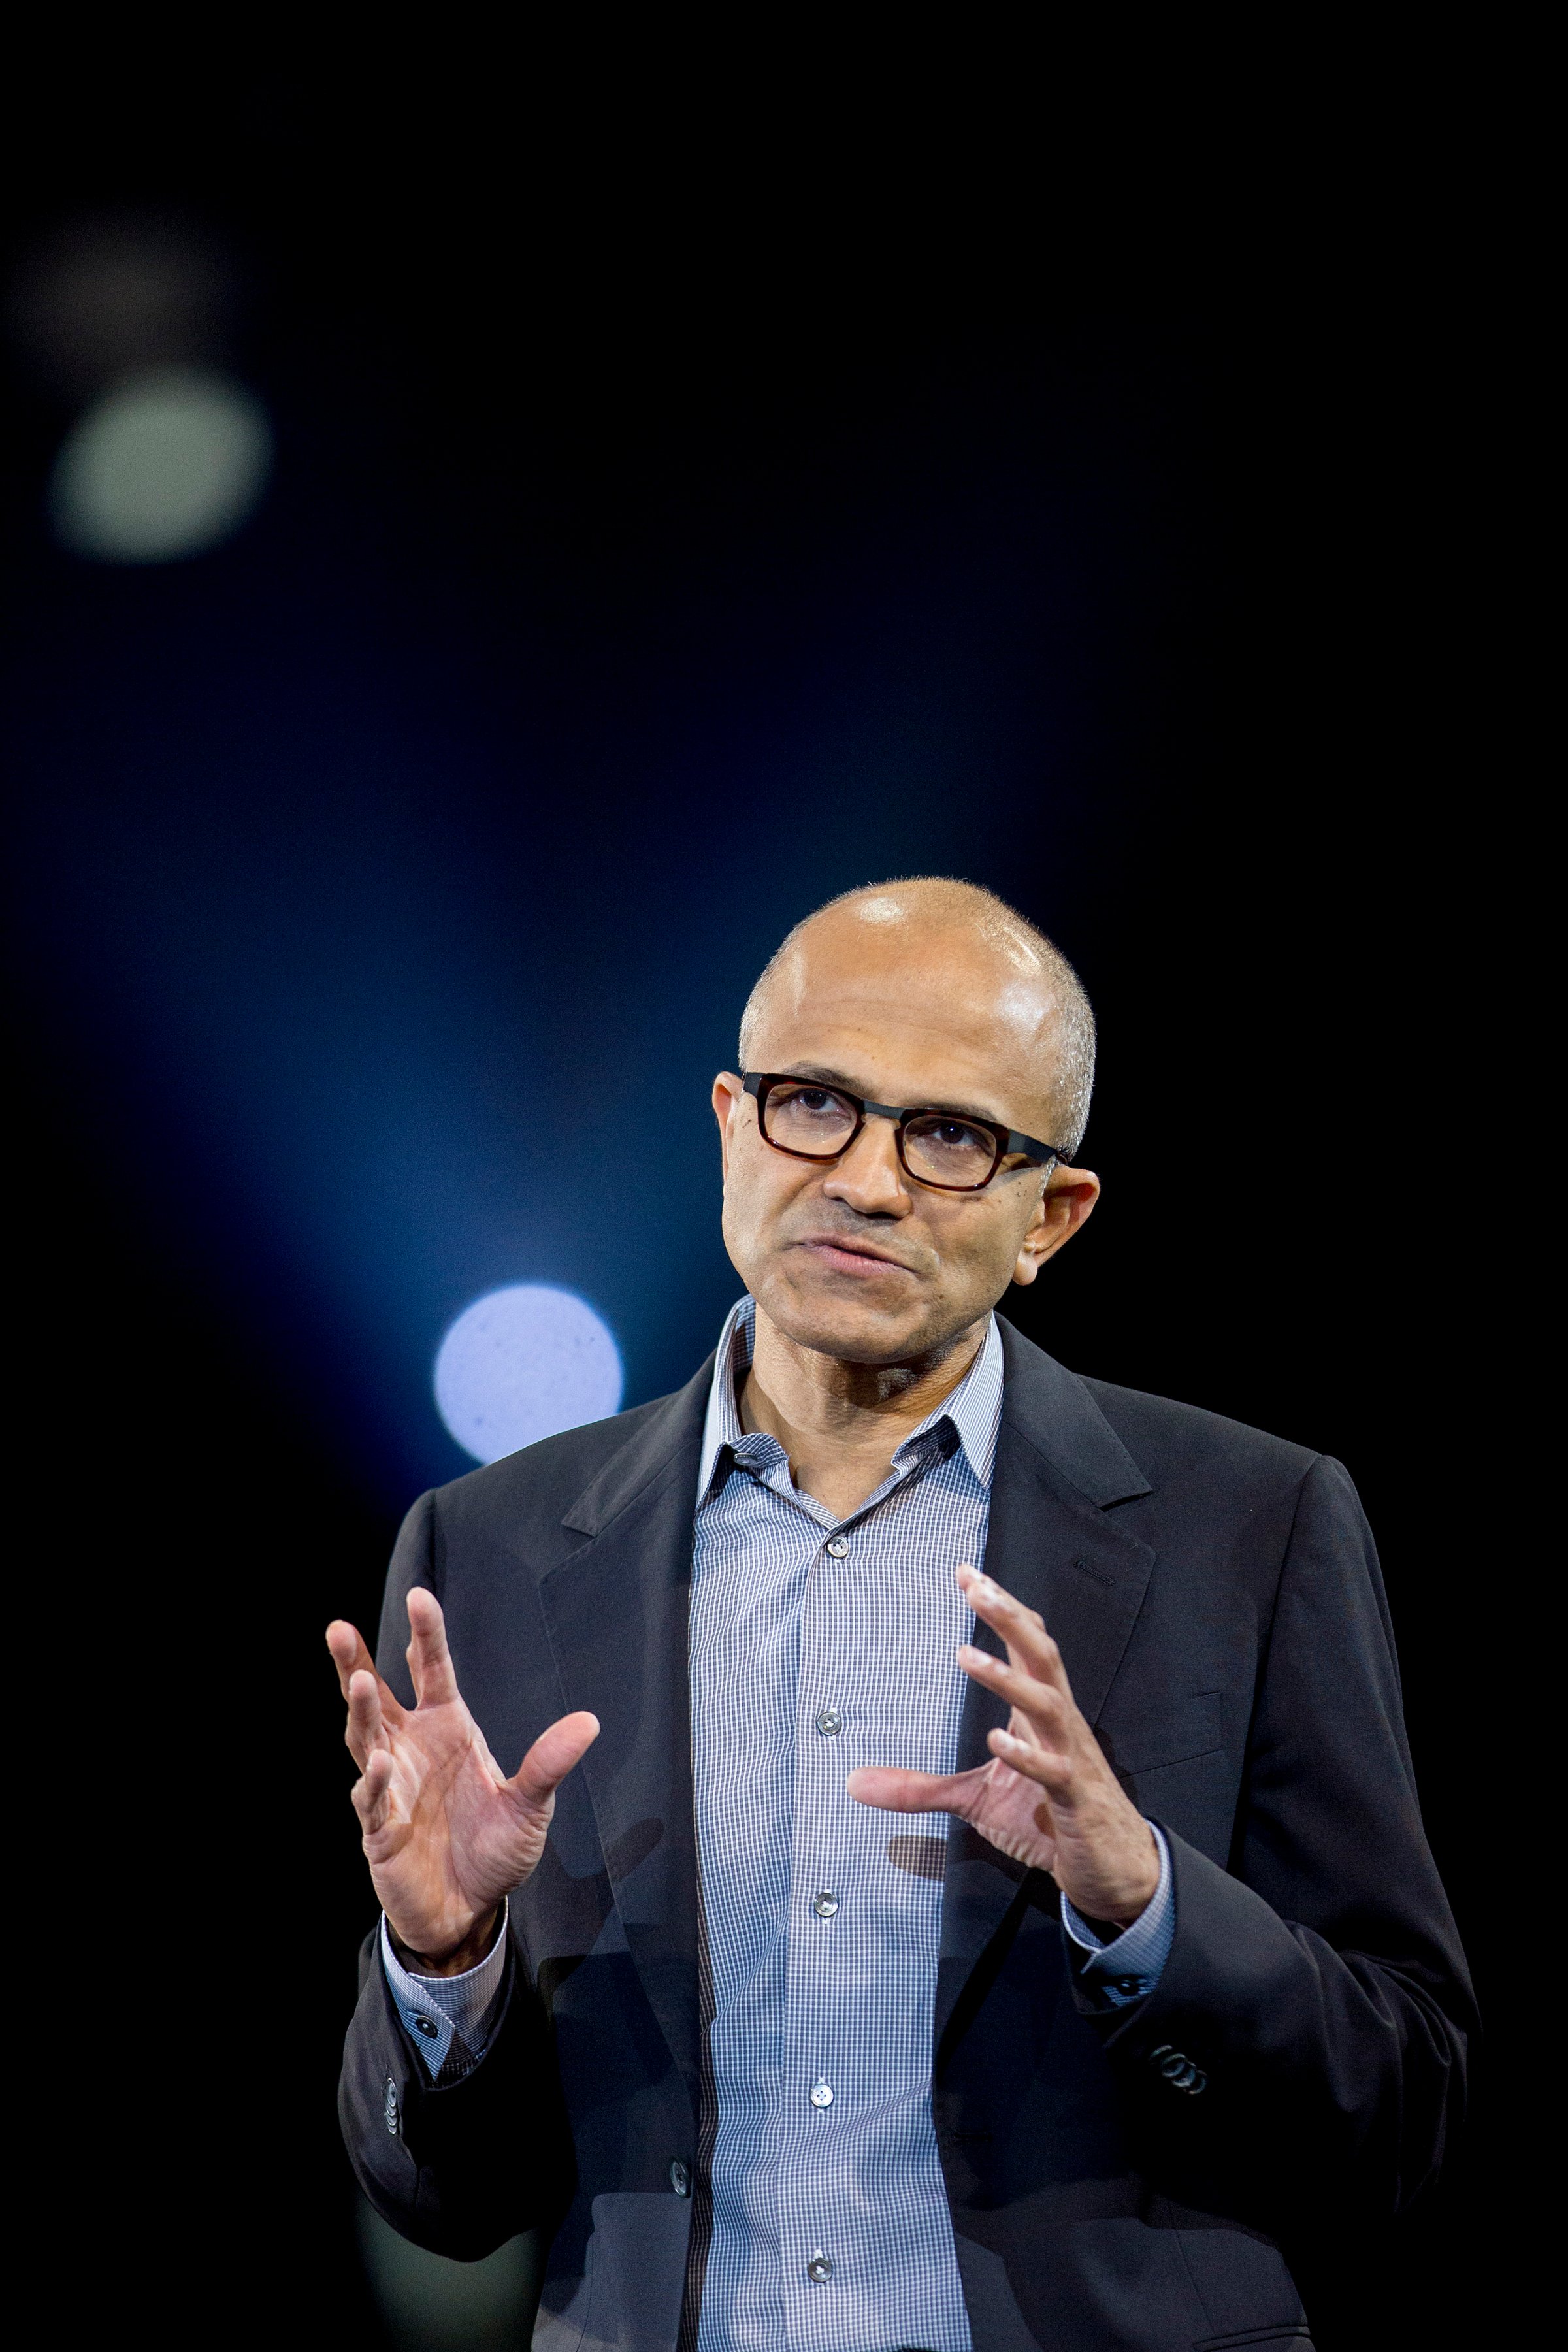 Satya Nadella, chief executive officer of Microsoft Corp., speaks during a keynote session at the Microsoft Worldwide Partner Conference in Washington on July 16, 2014.